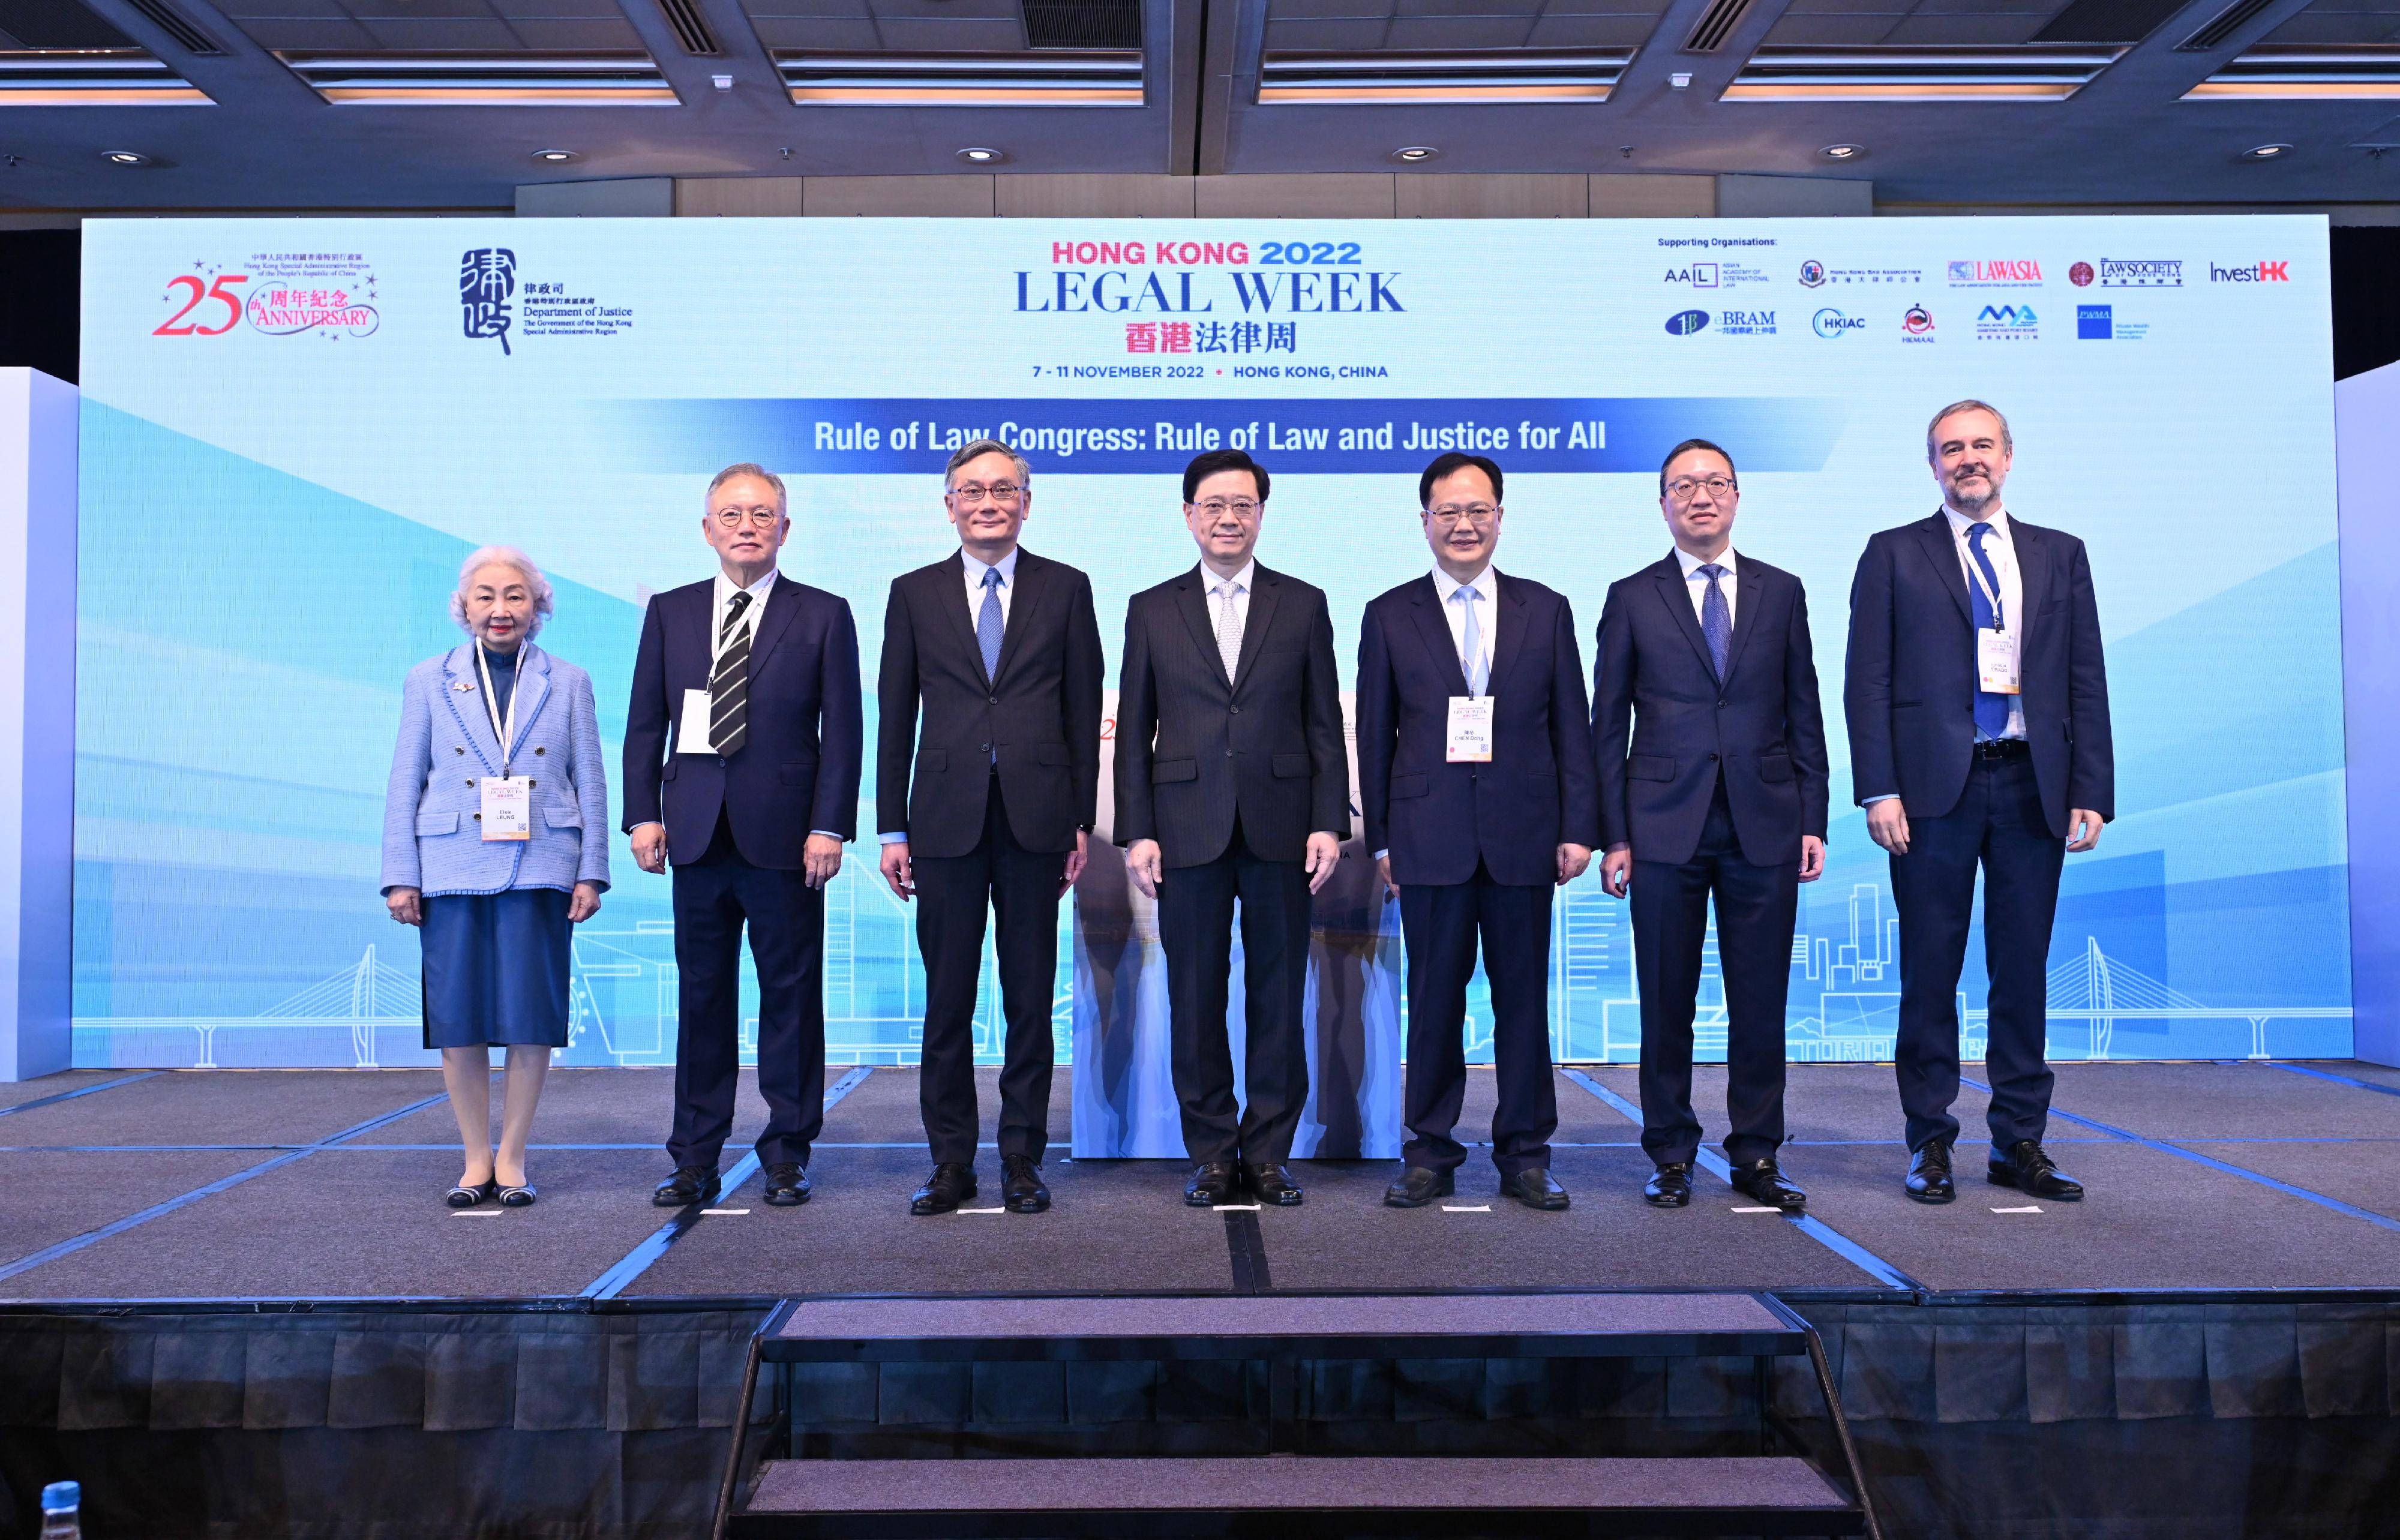 The Chief Executive, Mr John Lee, attended the Rule of Law Congress: Rule of Law and Justice for All under Hong Kong Legal Week 2022 today (November 11). Photo shows (from left) former Vice-chairperson of the Hong Kong Special Administrative Region (HKSAR) Basic Law Committee of the Standing Committee of the National People's Congress Miss Elsie Leung; Non-Permanent Judge of the Court of Final Appeal Mr Justice Robert Tang; the Chief Justice of the Court of Final Appeal, Mr Andrew Cheung Kui-nung; Mr Lee; Deputy Director of the Liaison Office of the Central People's Government in the HKSAR Mr Chen Dong; the Secretary for Justice, Mr Paul Lam, SC; and the Secretary-General of the International Institute for the Unification of Private Law, Professor Ignacio Tirado, at the event.